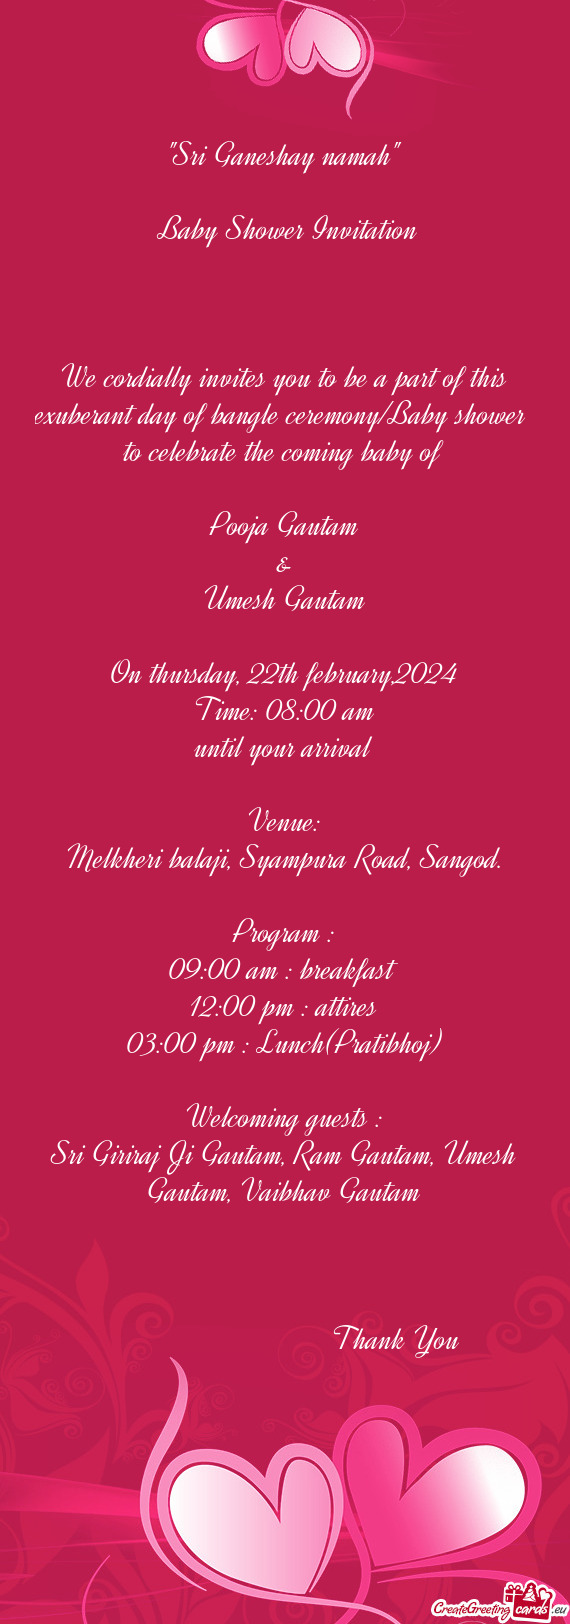 We cordially invites you to be a part of this exuberant day of bangle ceremony/Baby shower to celeb